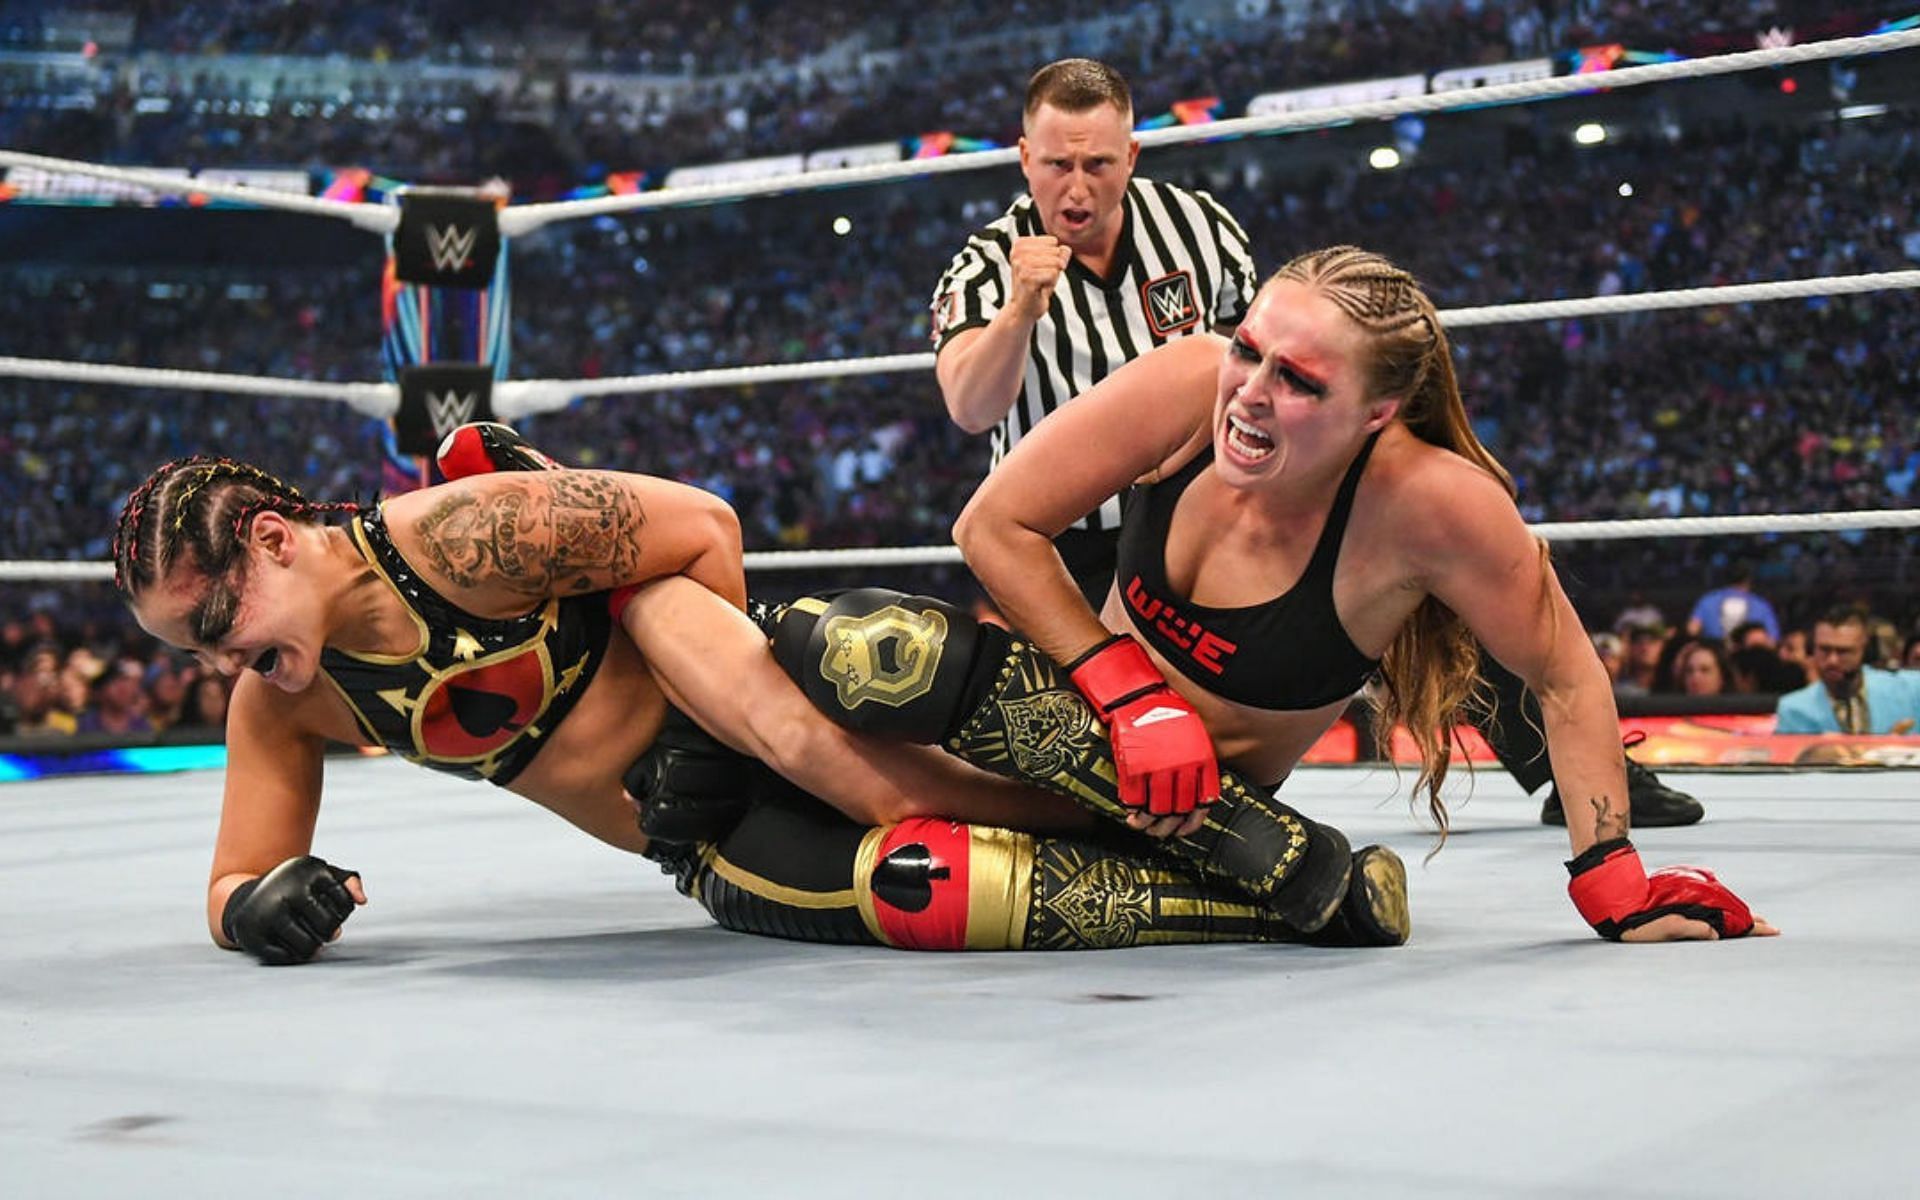 Baszler defeated Rousey in a snoozefest